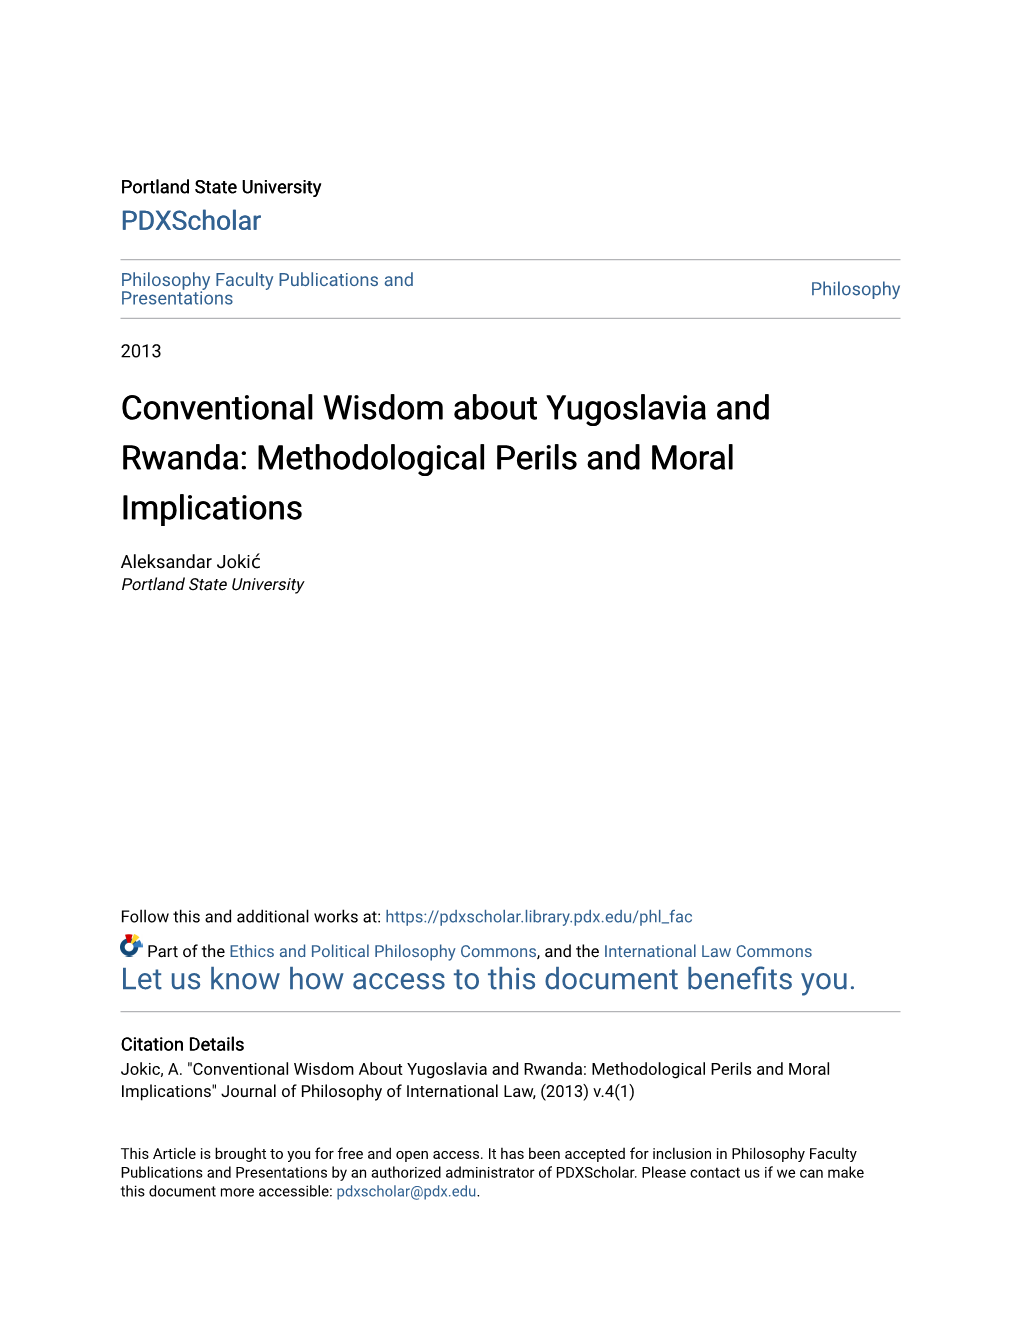 Conventional Wisdom About Yugoslavia and Rwanda: Methodological Perils and Moral Implications